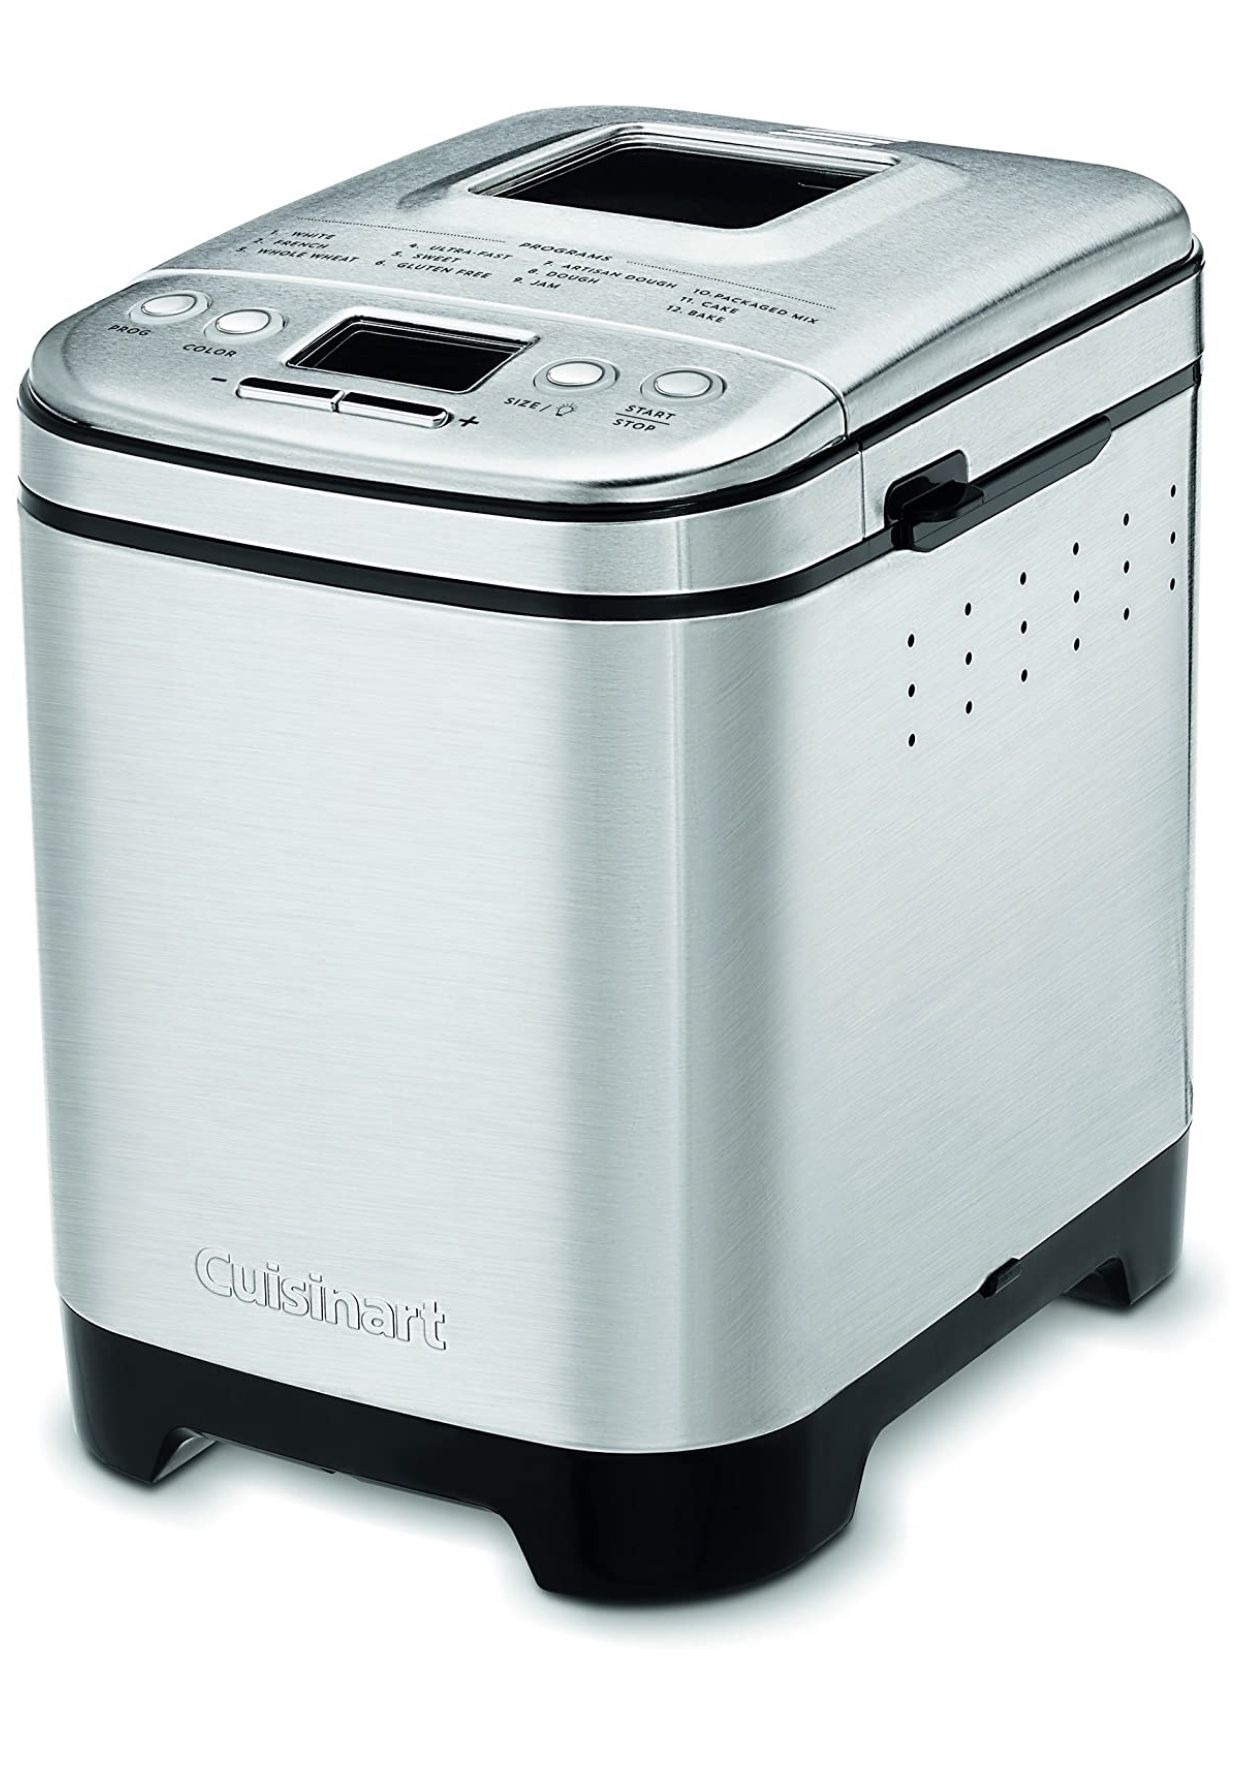 Cuisineart Compact Automatic Bread Maker